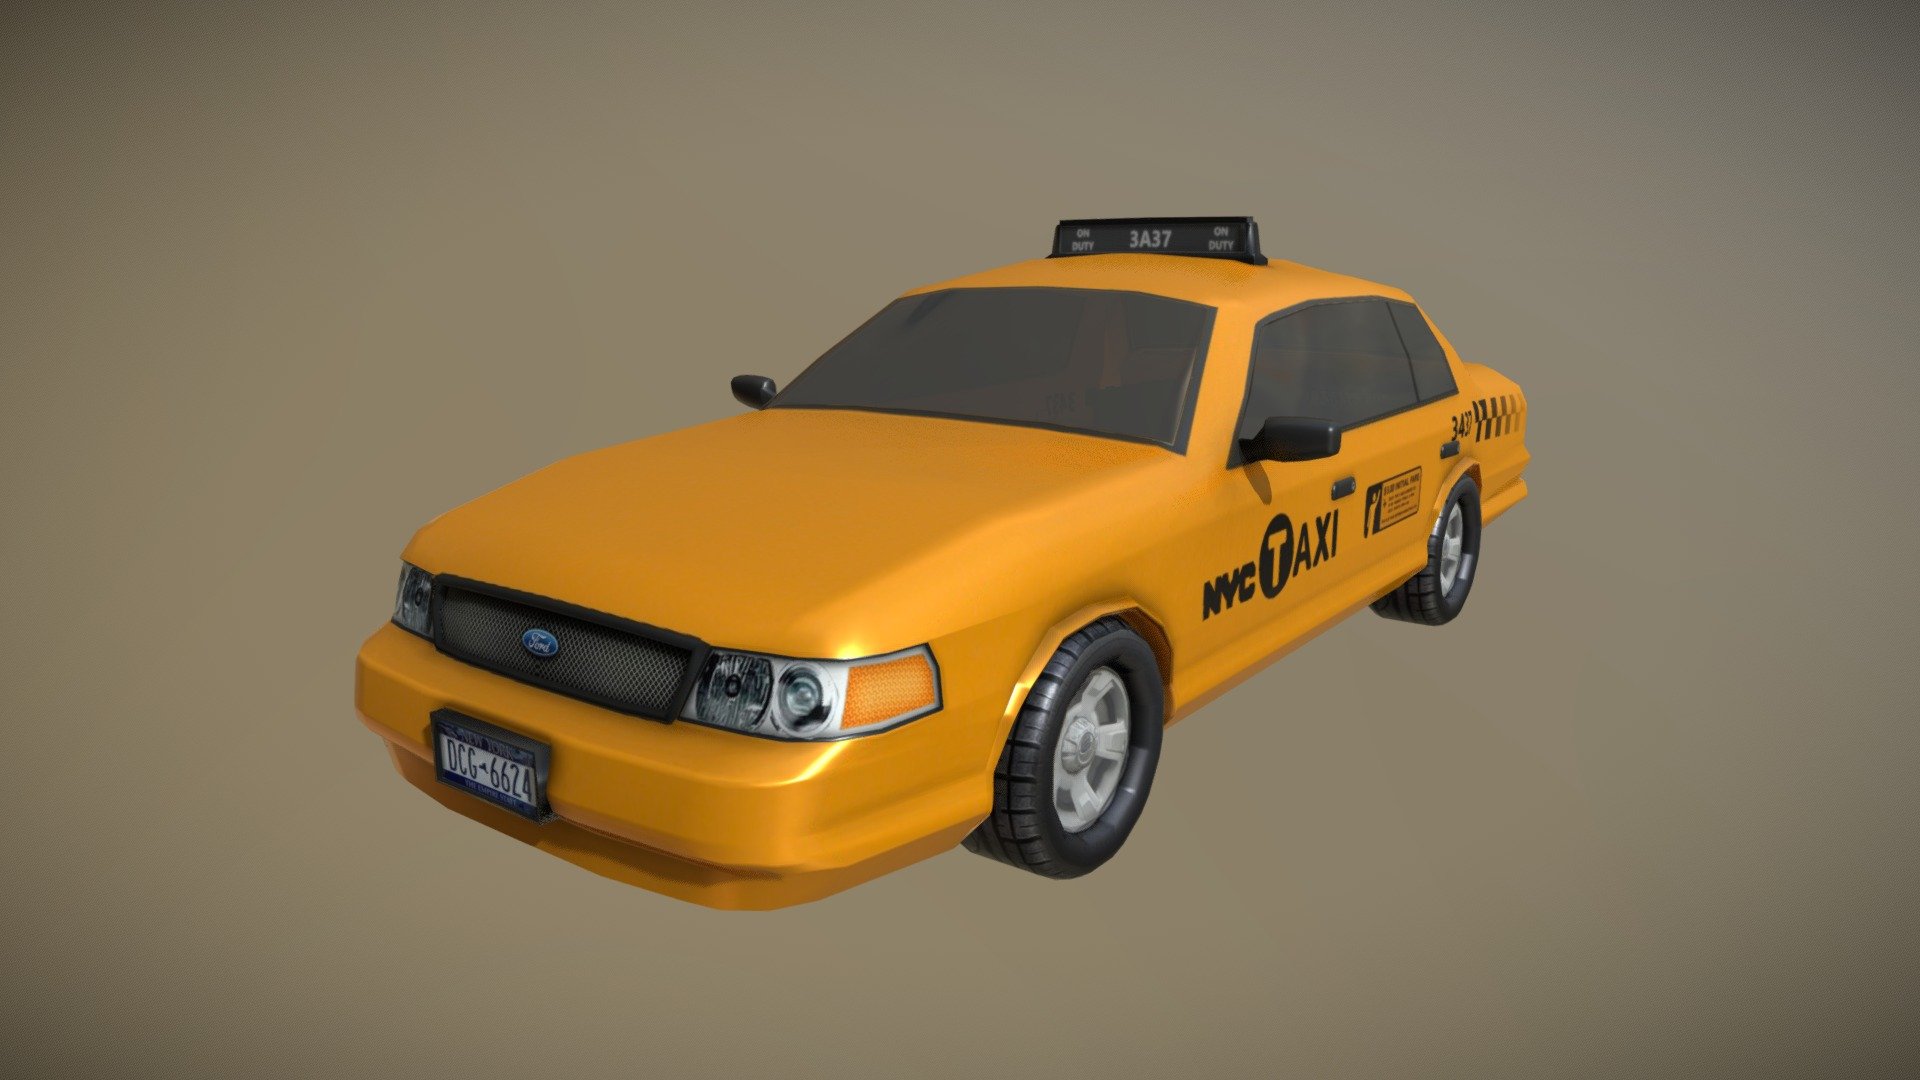 New York Taxi low-poly 3d model ready for Virtual Reality (VR), Augmented Reality (AR), games and other real-time apps 3d model